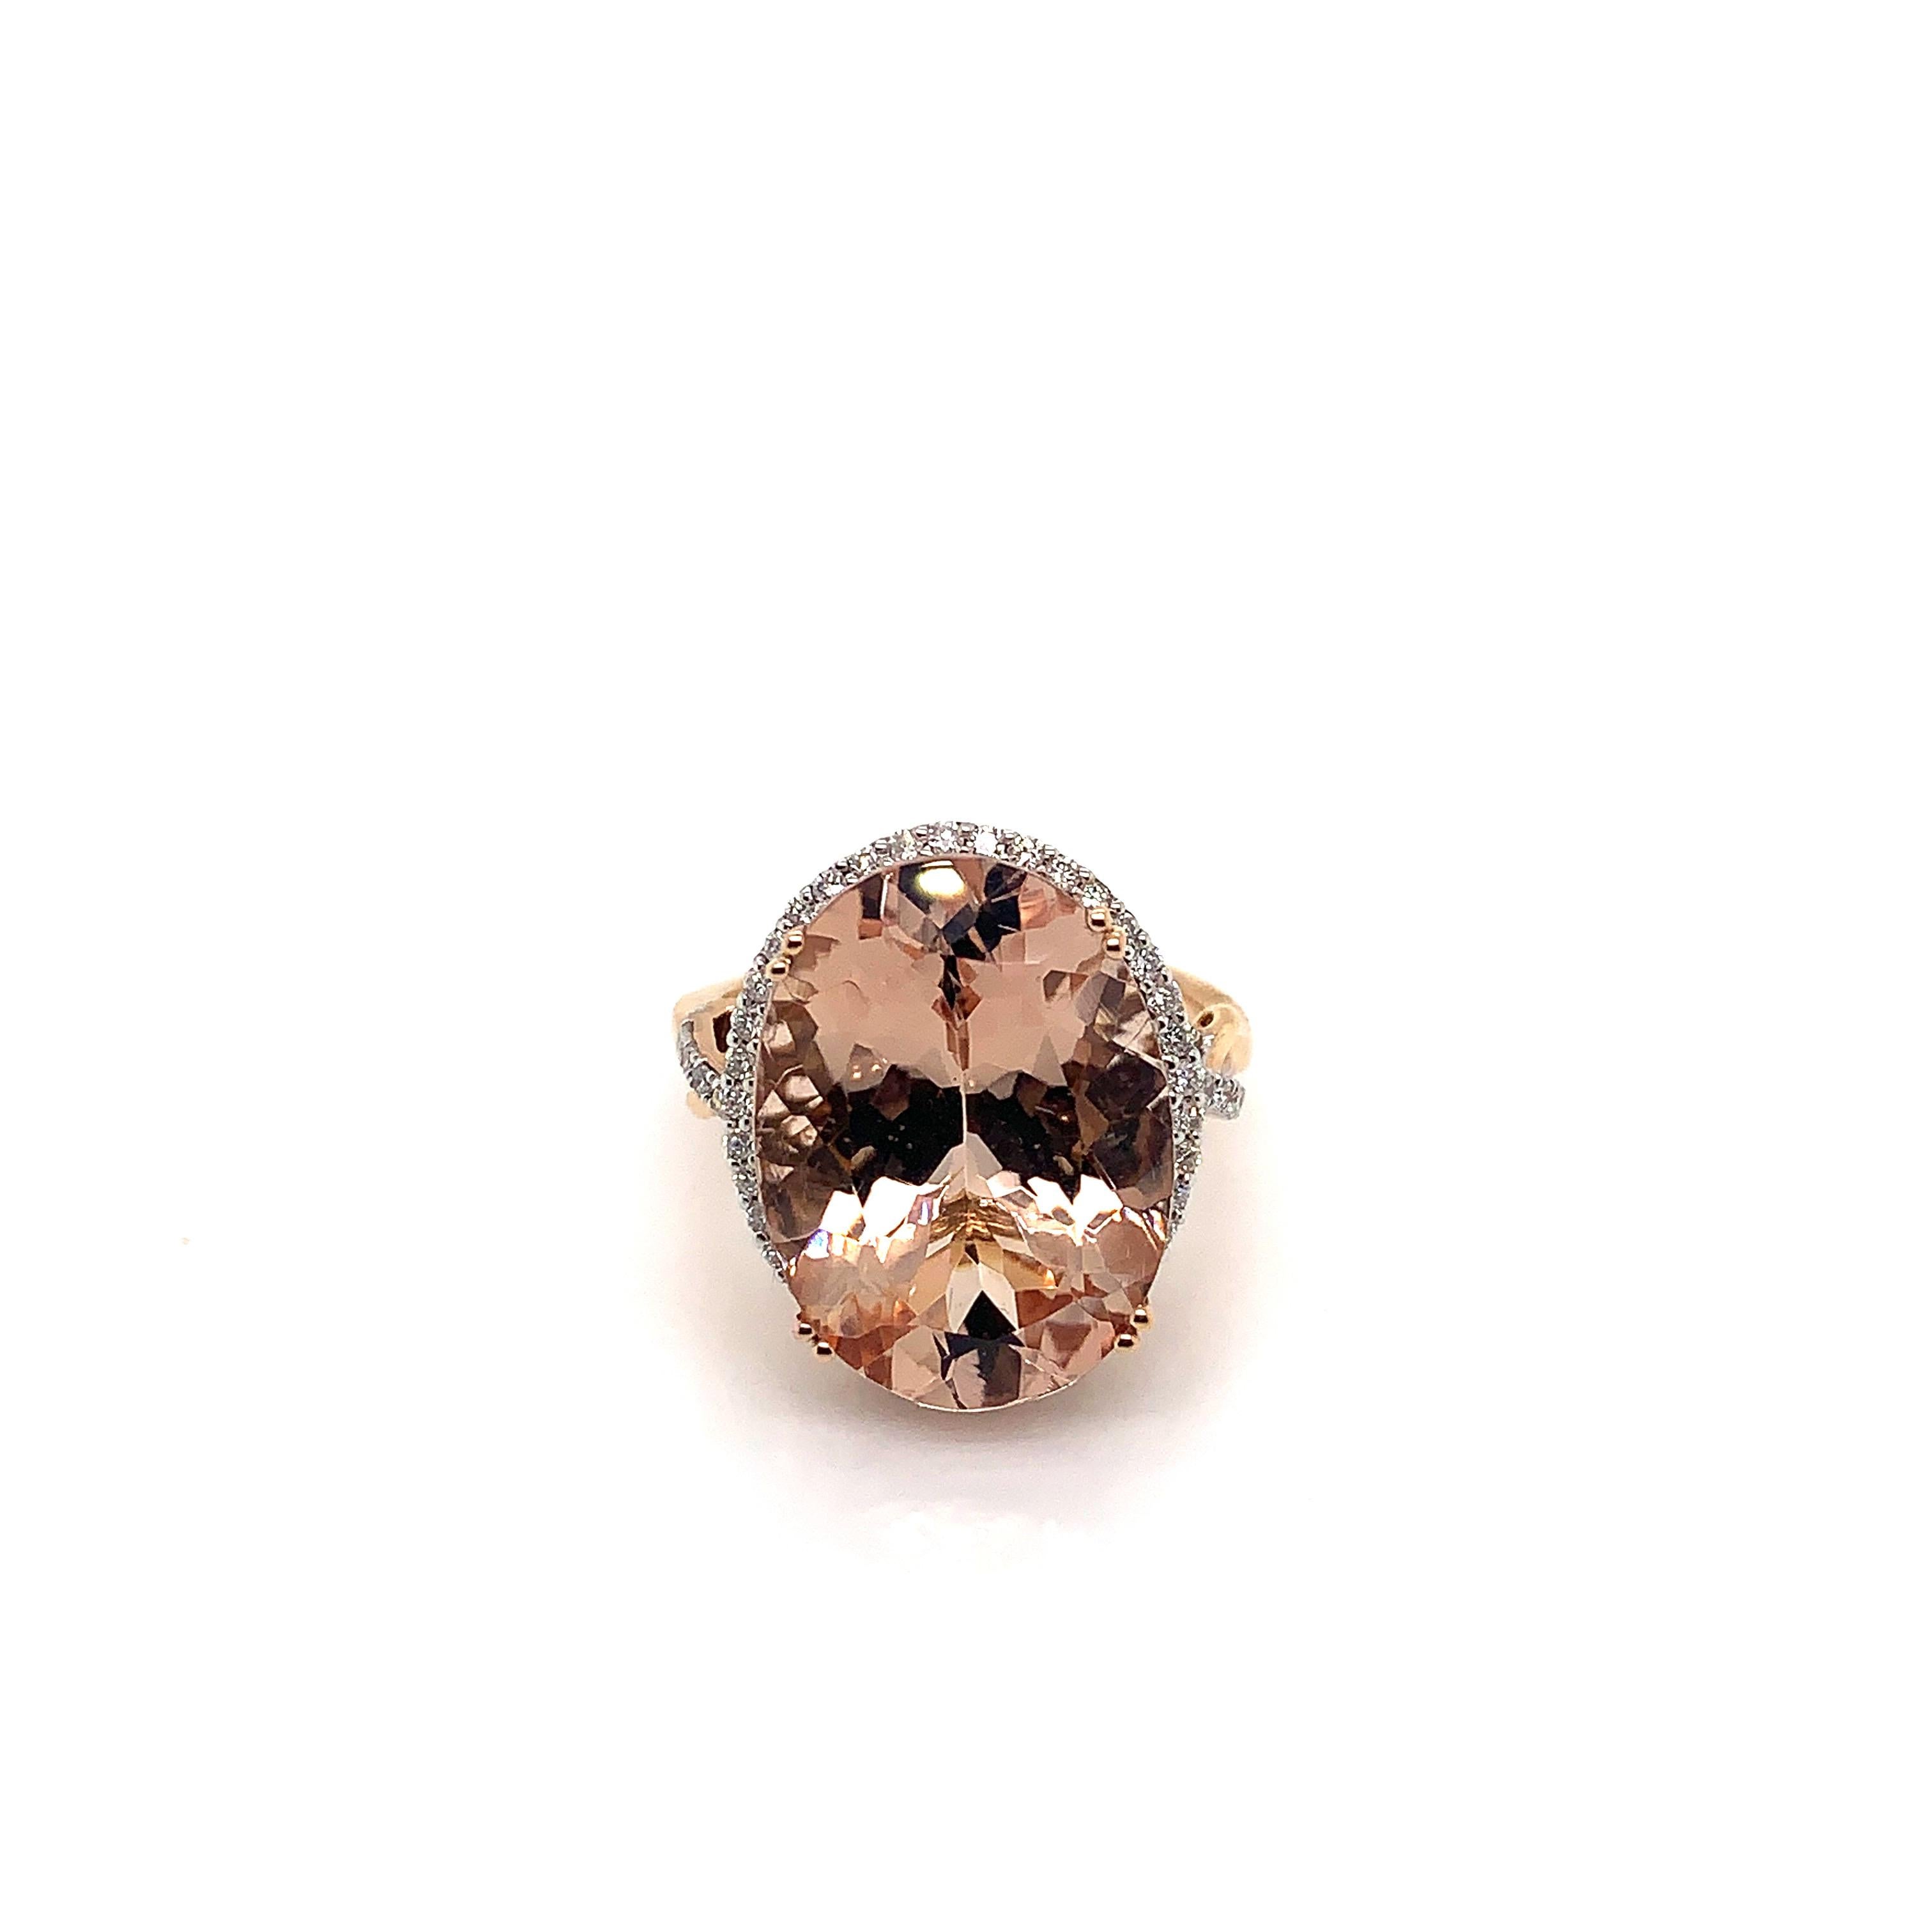 Classic morganite ring in 18K rose gold with diamonds. 

Morganite: 11.17 carat oval shape.
Diamonds: 0.283 carat, G colour, VS clarity. 
Gold: 4.65g, 18K rose gold. 